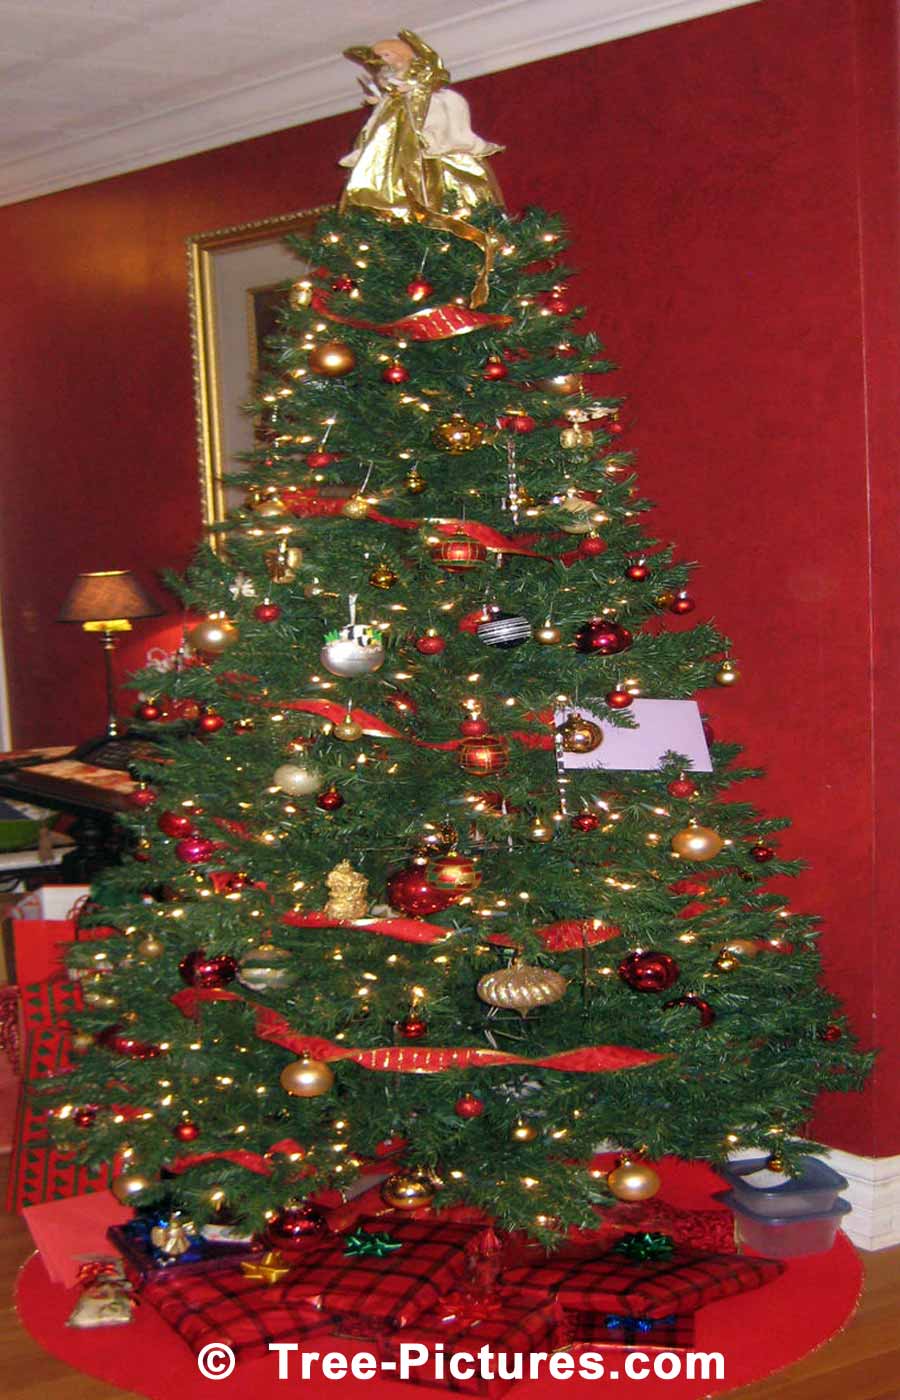 Christmas Tree Decorated in Red and Gold | Xmas Trees at Tree-Pictures.com